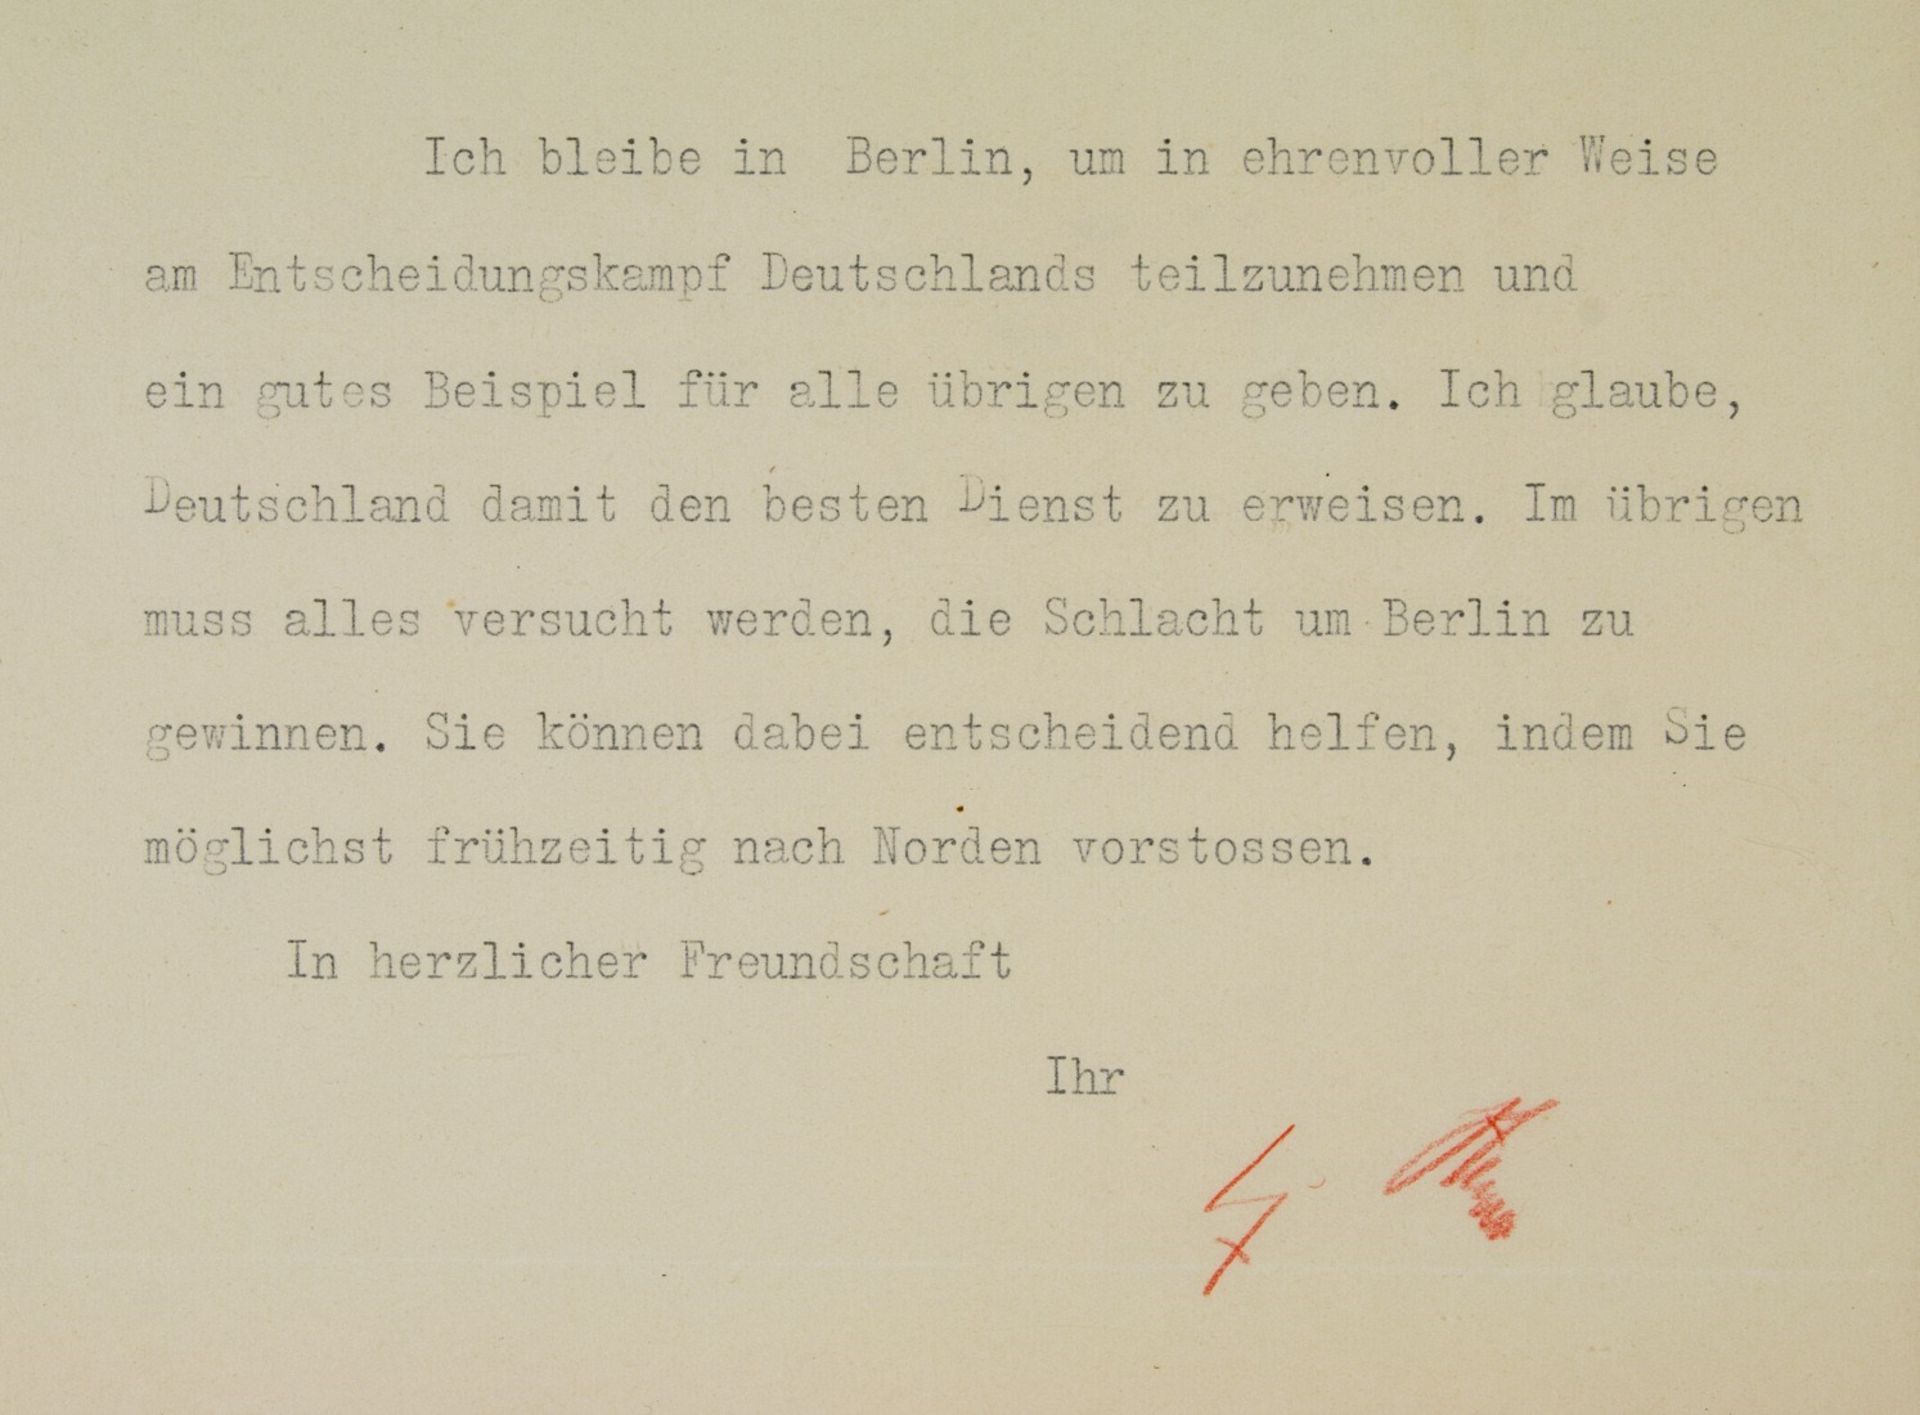 ADOLF HITLER’S LAST MESSAGE TO GERMANY: “I SHALL REMAIN IN BERLIN…” - Image 3 of 7